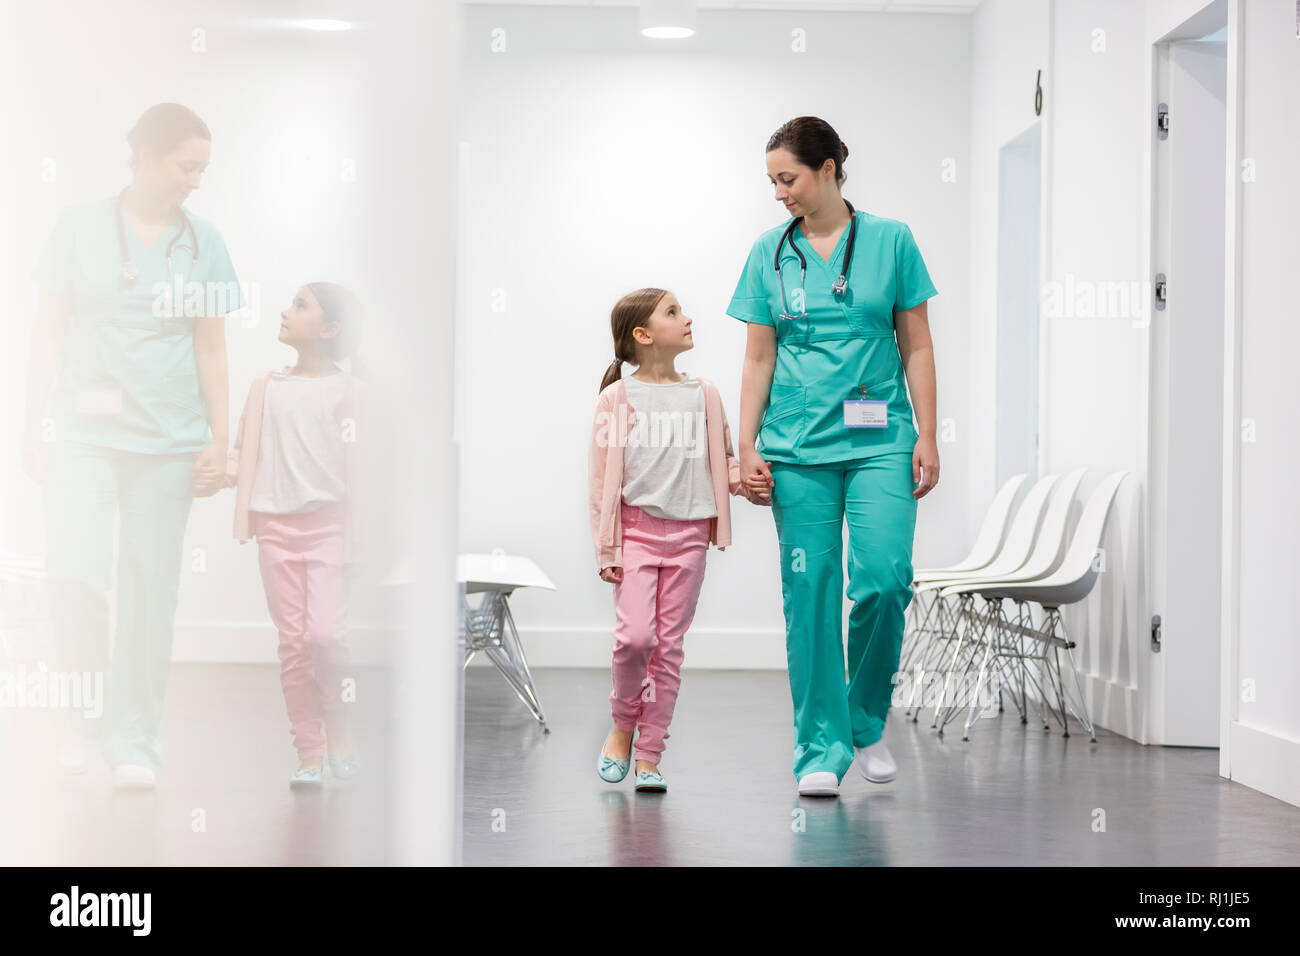 Nurse and girl patient walking in corridor at hospital Stock Photo